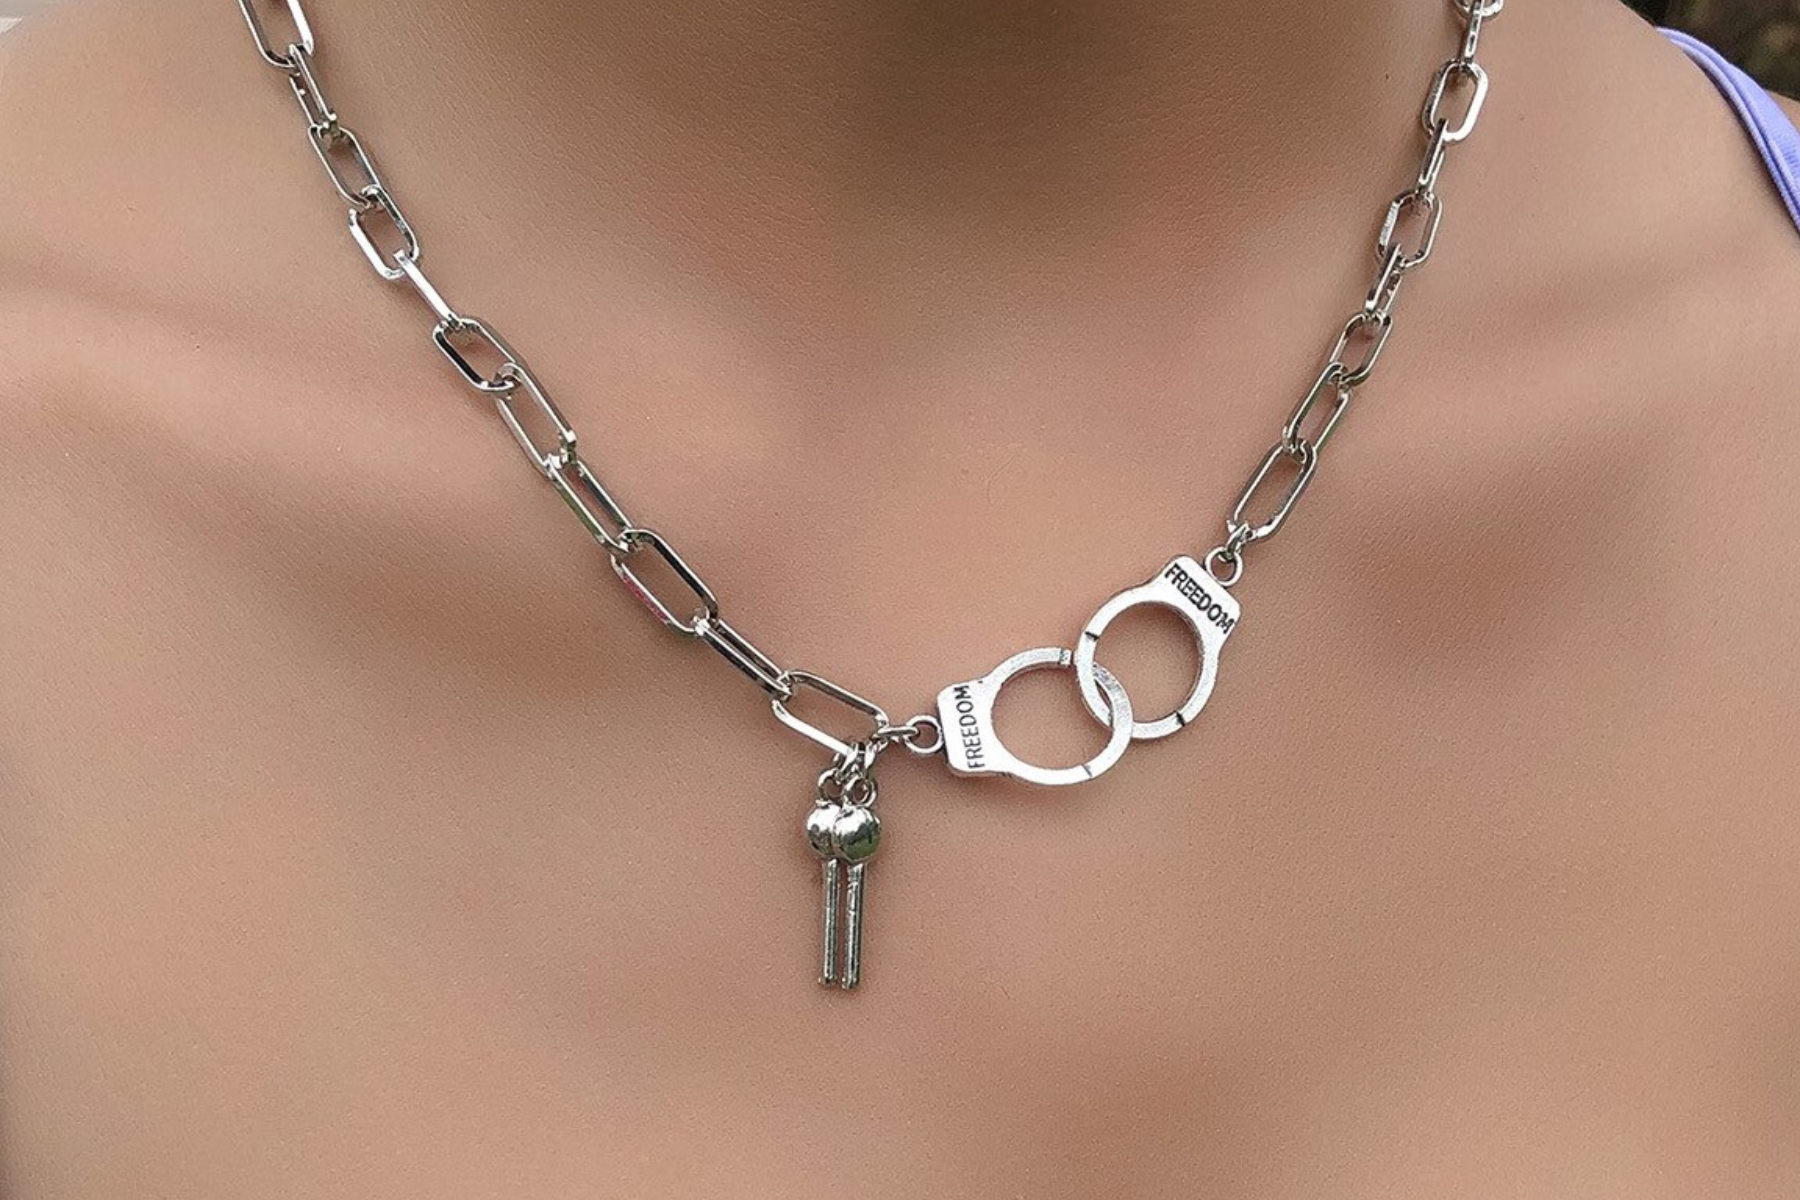 A photograph of a necklace featuring a lock and key handcuff design, worn around a woman's neck in a close-up view